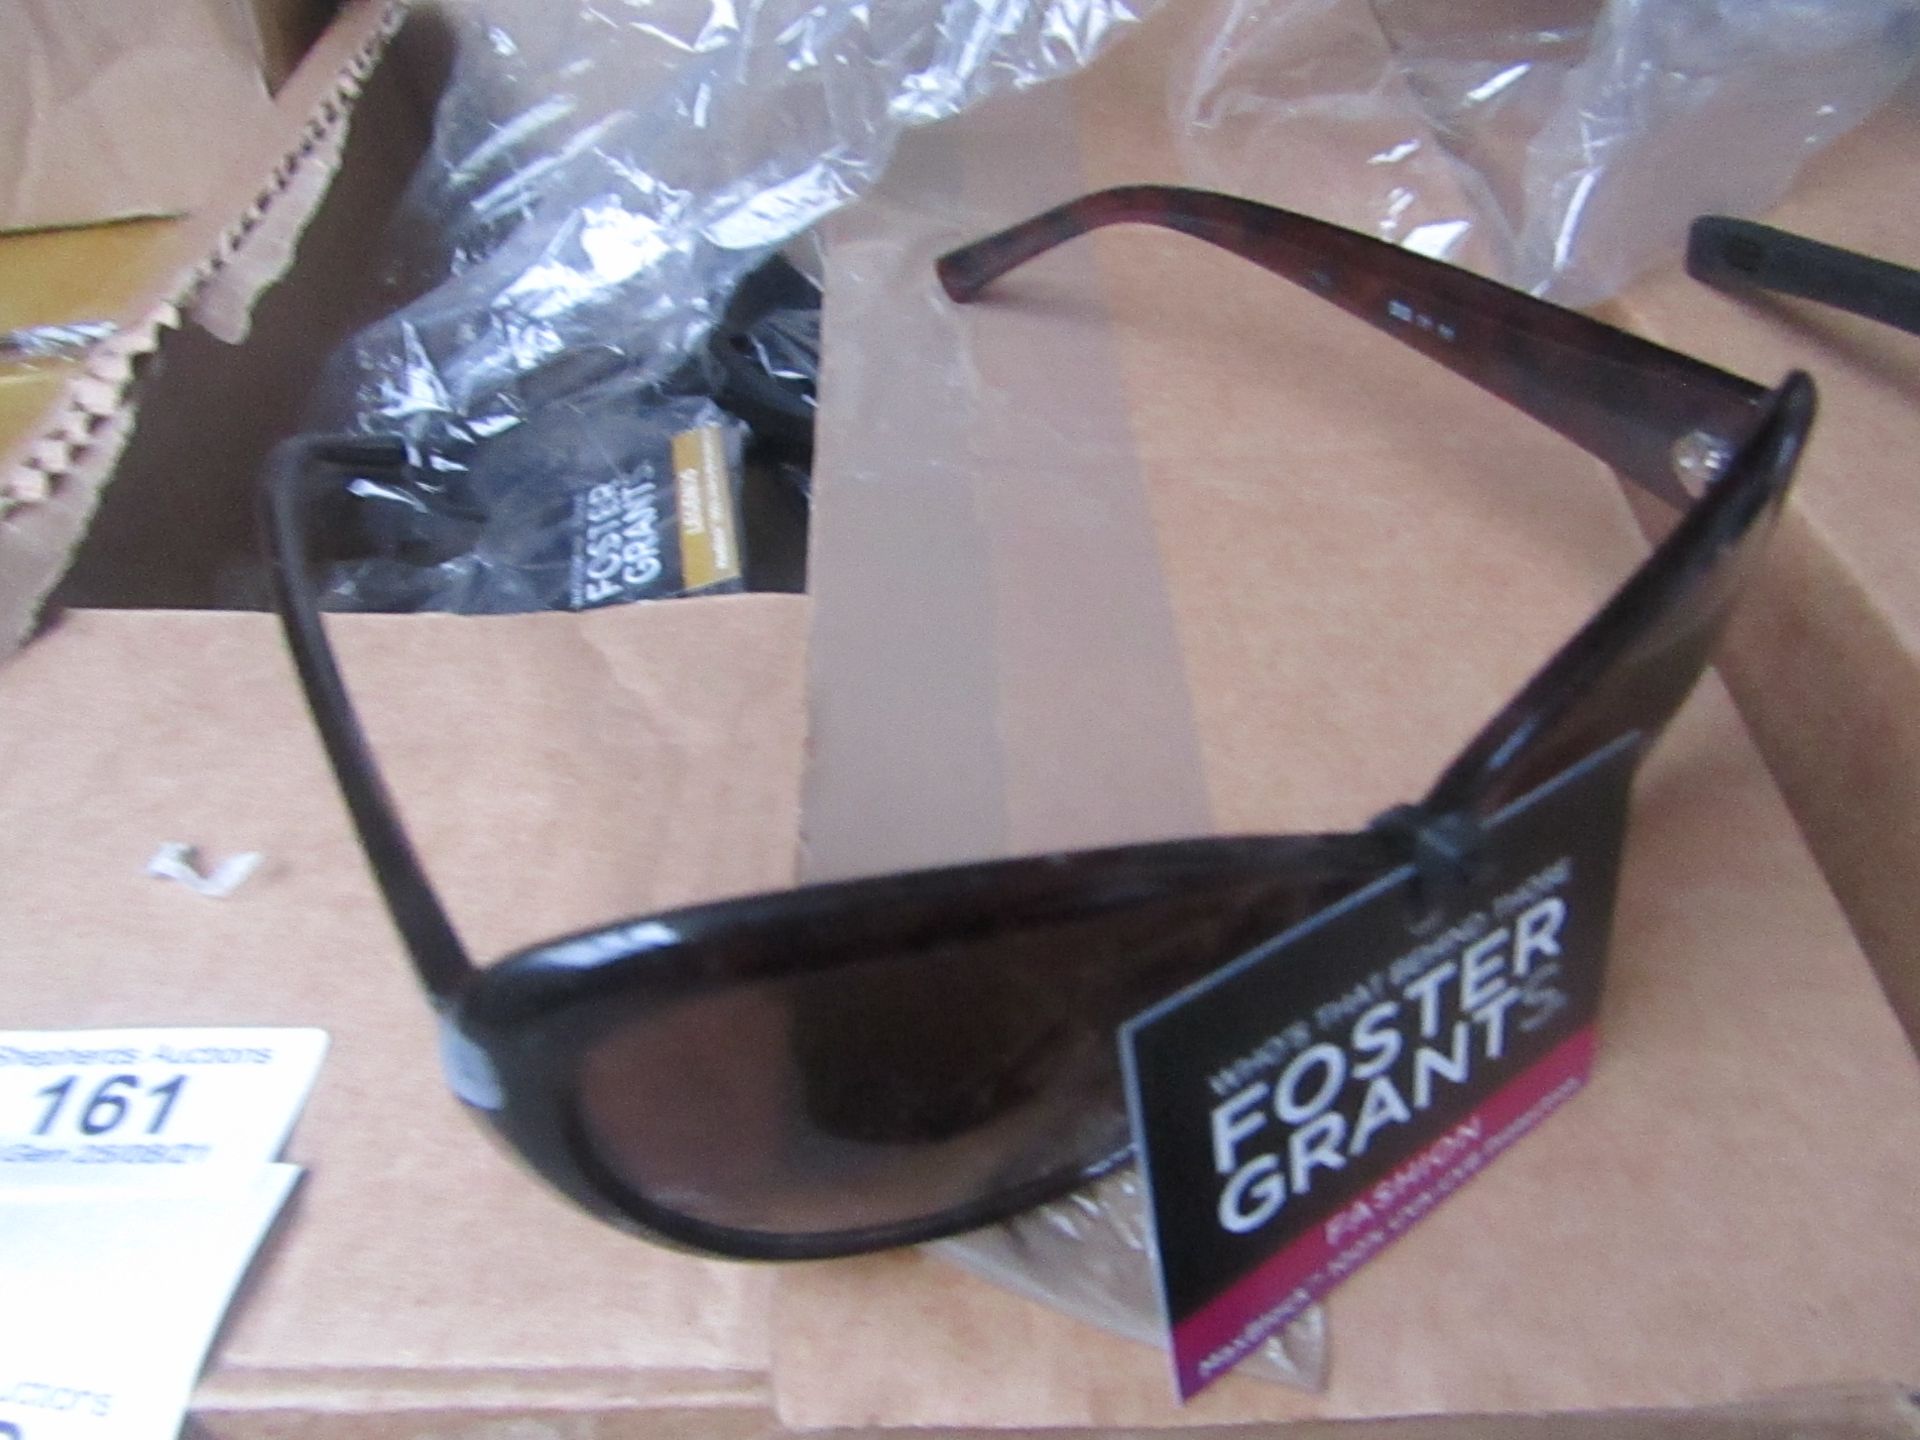 10x Grant Foster - Ladies Leopard Print Sun Glasses (UVA - UVB Protection) - New & Packaged.